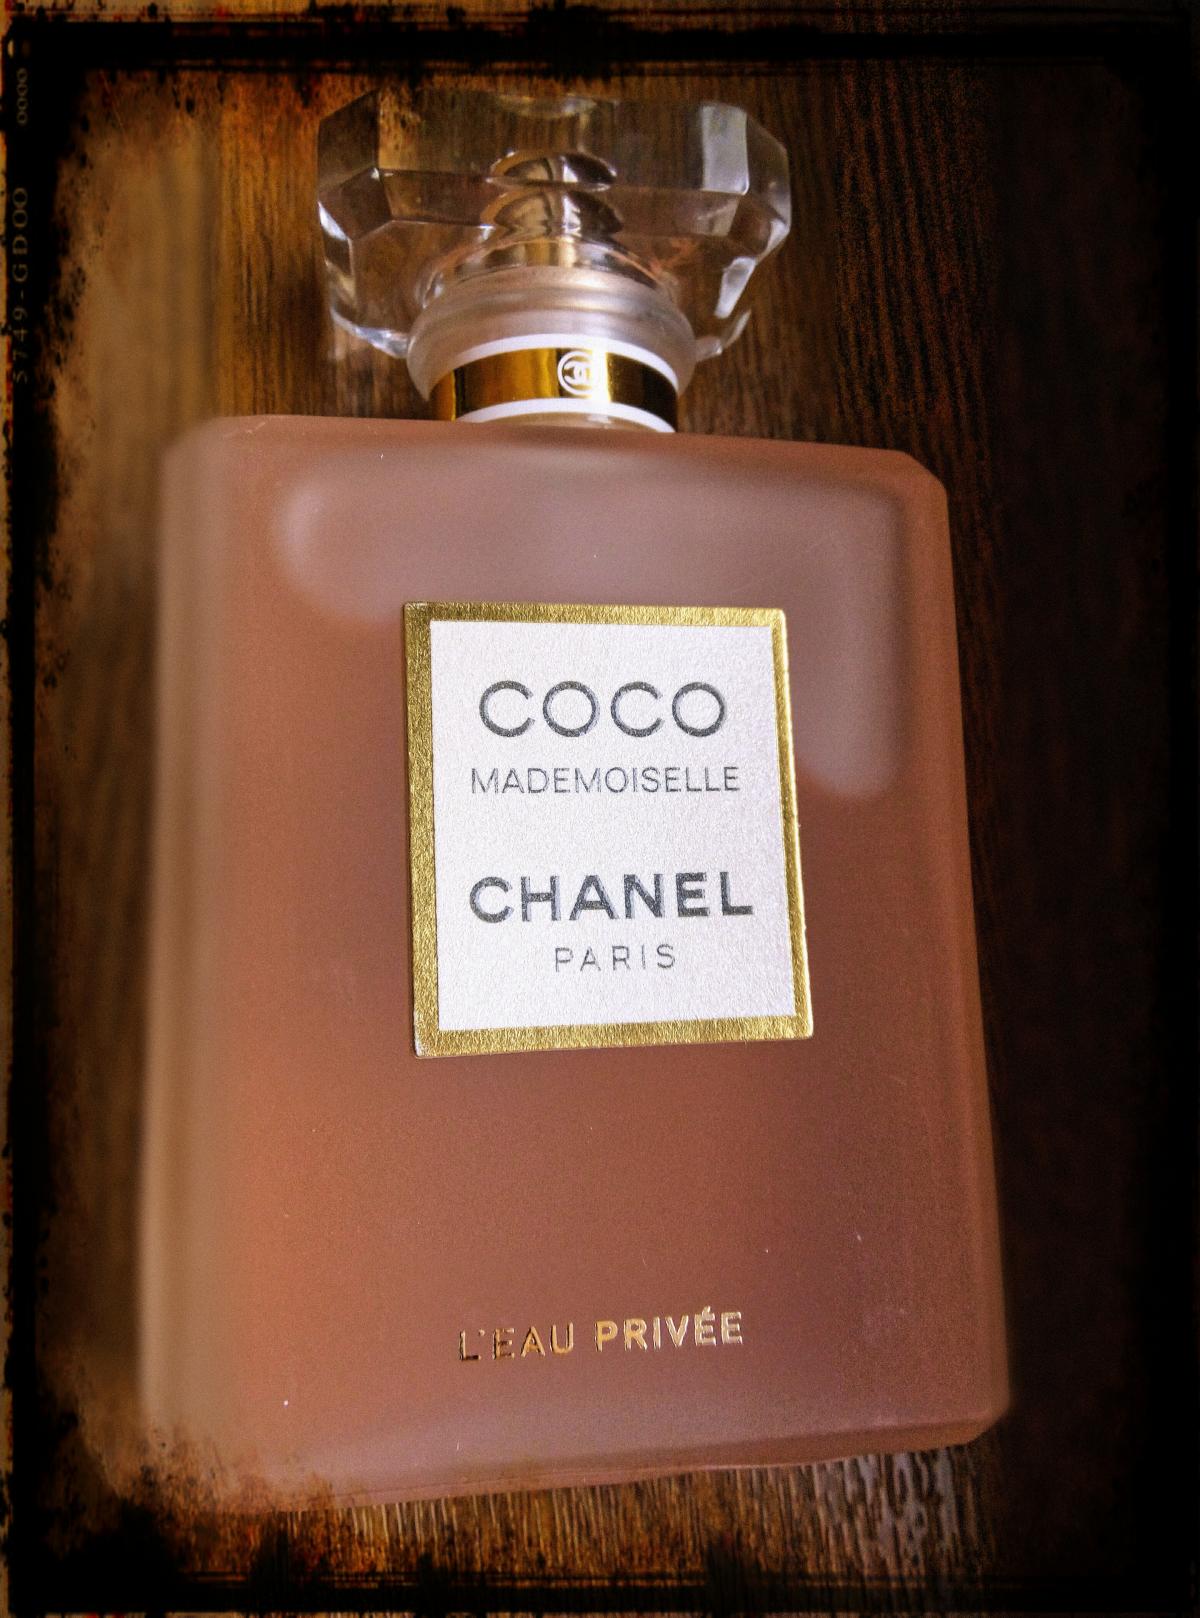 Coco Mademoiselle L'Eau Privée Chanel perfume - a new fragrance for